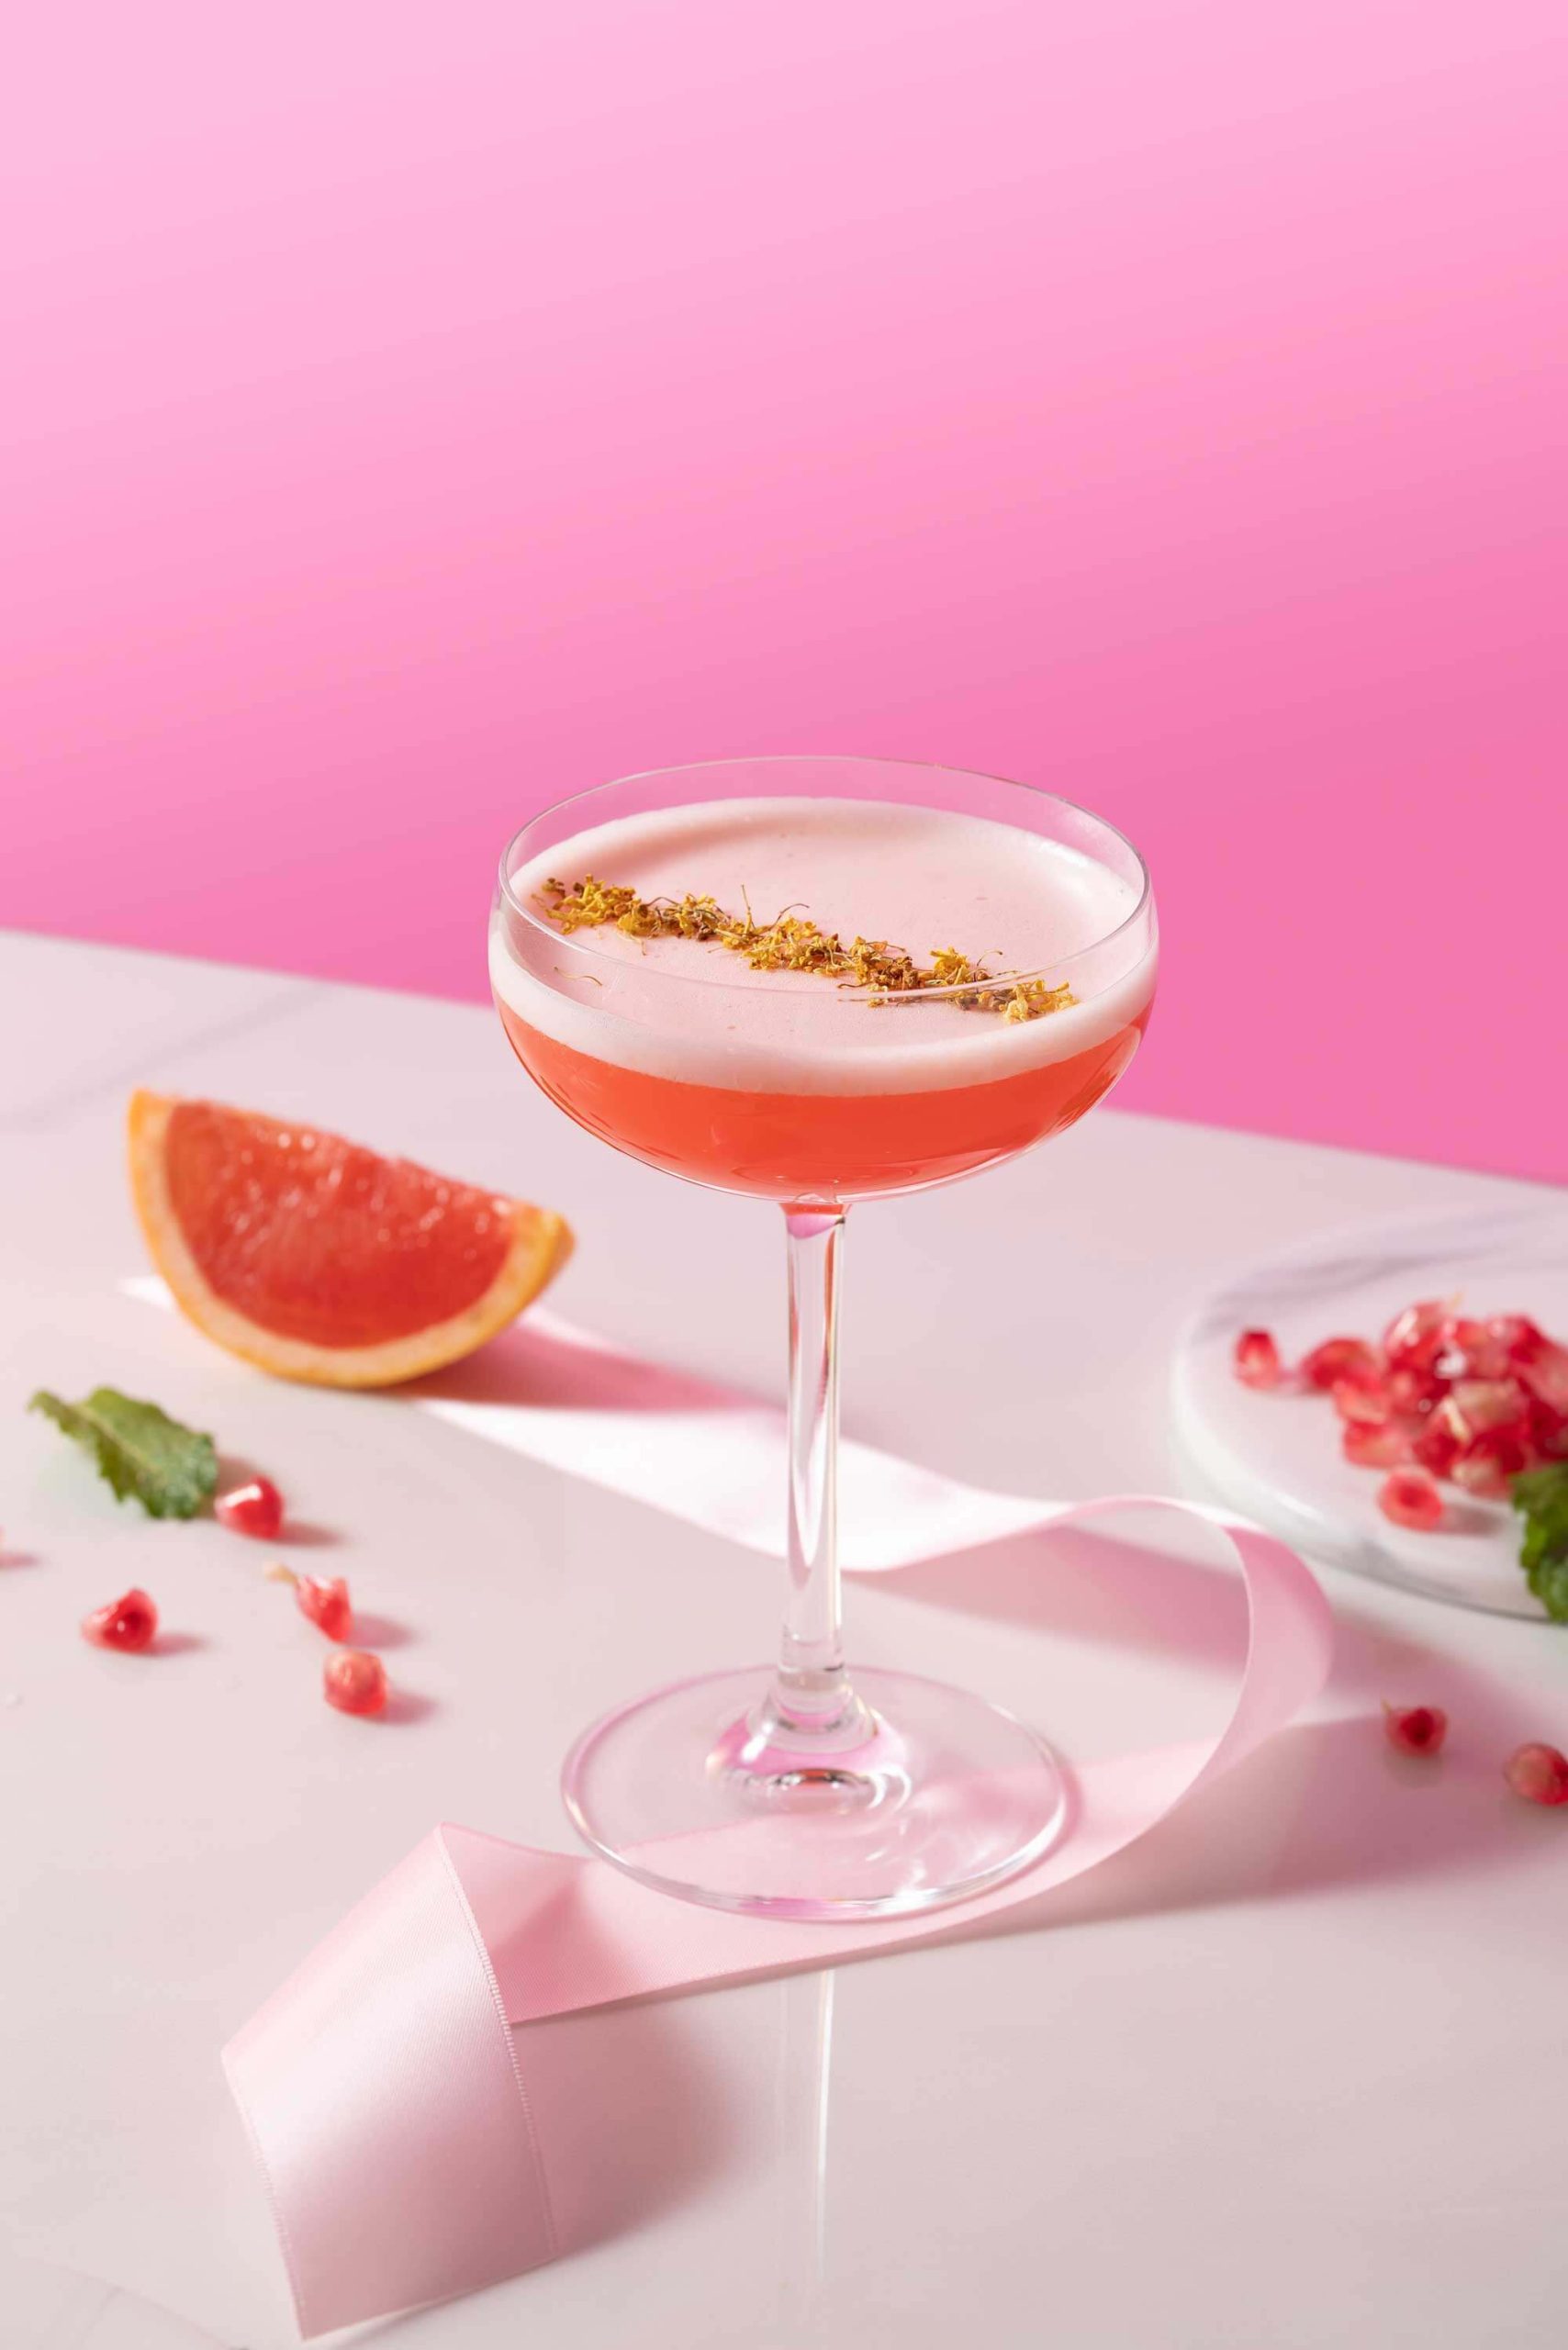 The Pink Osmanthus Sour is a blend of aromatic Osmanthus flowers and Aperol with uplifting citrus notes and a hint of bitter.